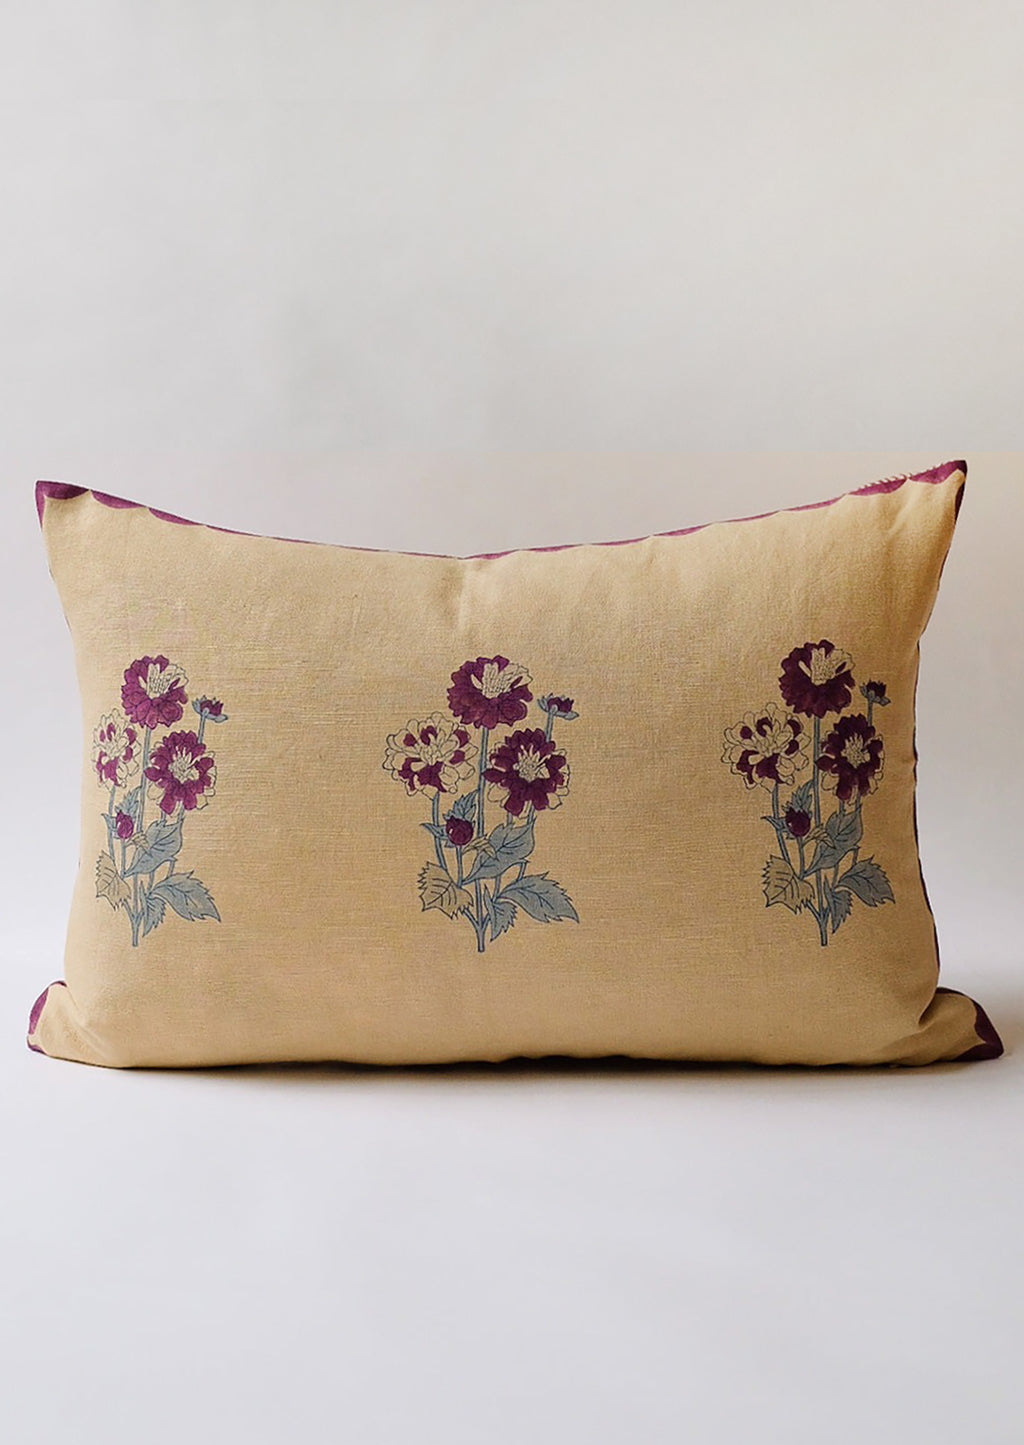 1: A lumbar throw pillow in sand color with purple flowers.